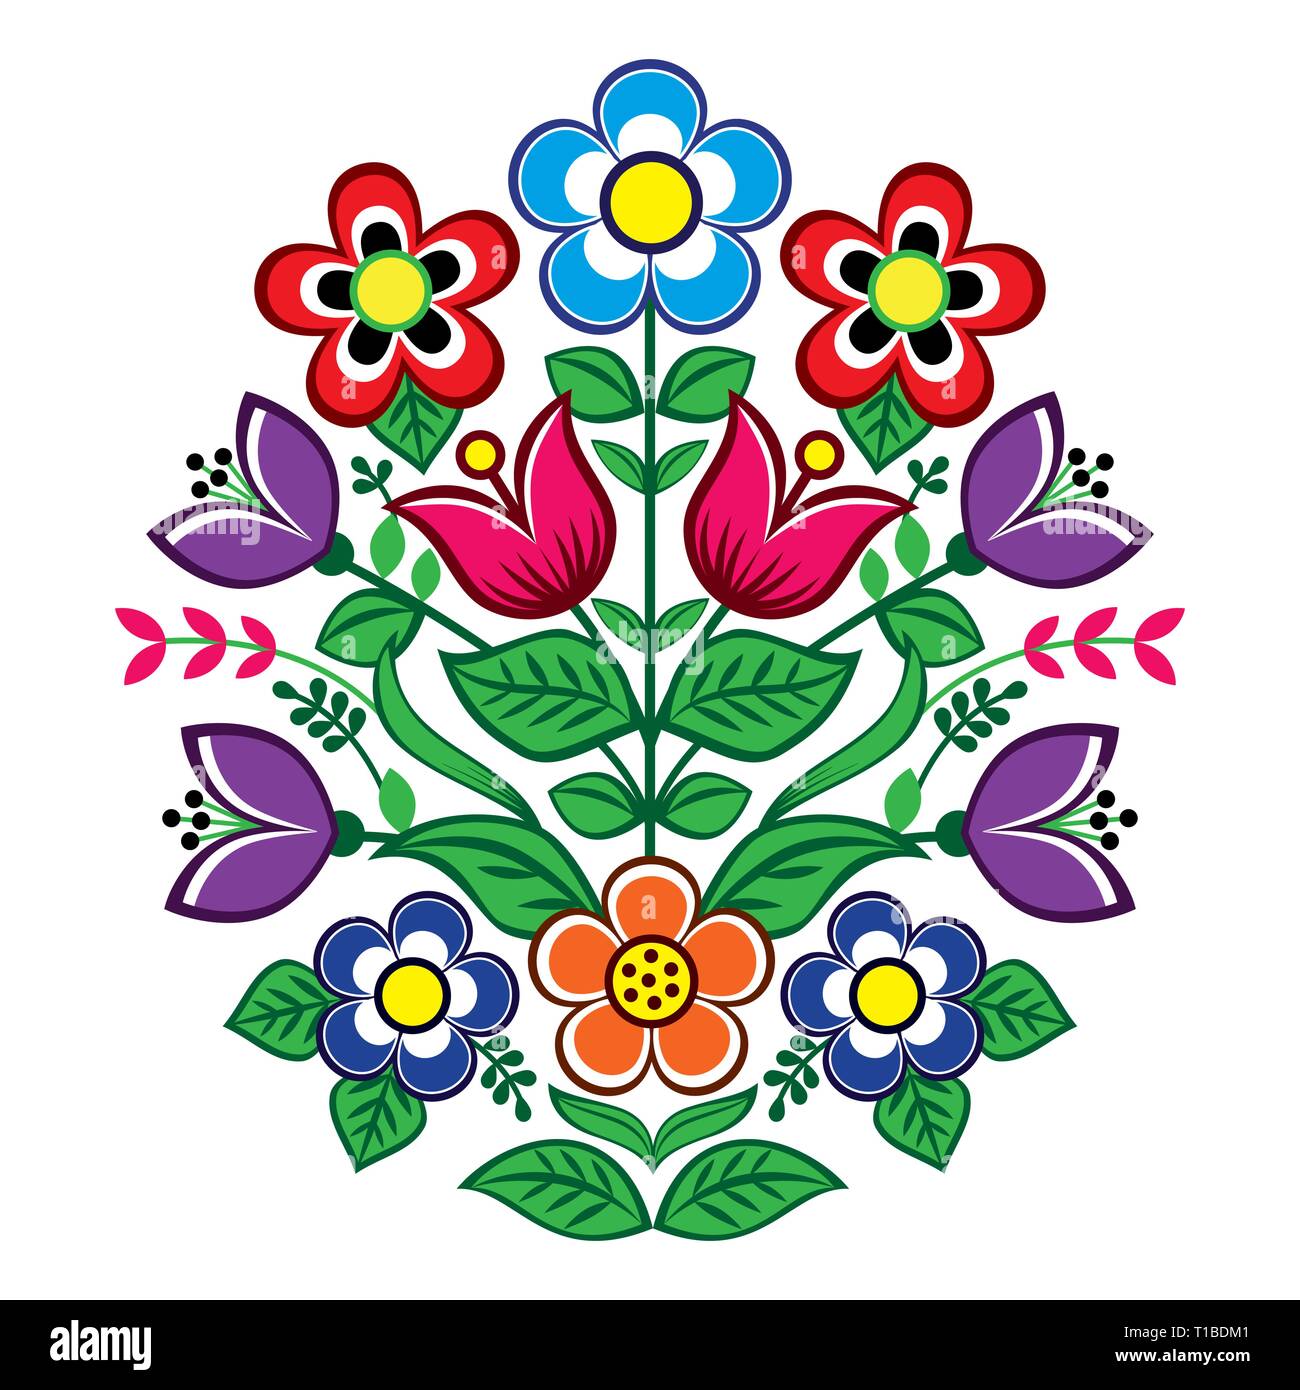 Floral vector design, Polish folk art vector decoration, Zalipie decorative pattern with roses and leaves - greeting card, wedding invitation Stock Vector